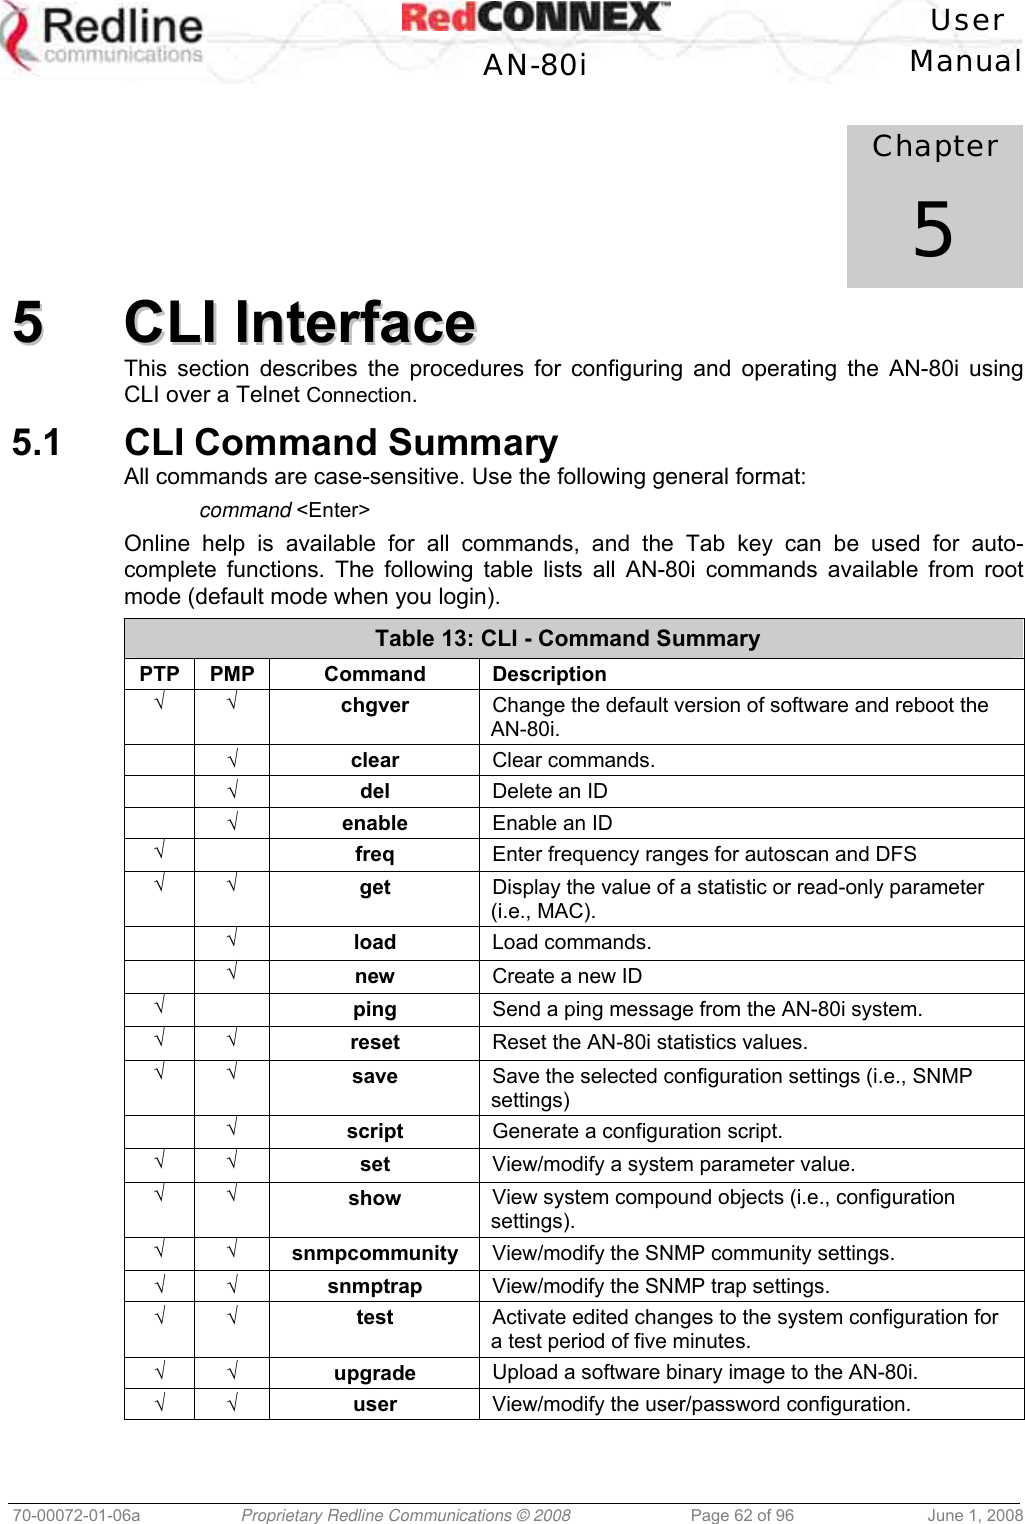   User  AN-80i Manual  70-00072-01-06a  Proprietary Redline Communications © 2008  Page 62 of 96  June 1, 2008             Chapter 5 55  CCLLII  IInntteerrffaaccee  This section describes the procedures for configuring and operating the AN-80i using CLI over a Telnet Connection. 5.1  CLI Command Summary All commands are case-sensitive. Use the following general format:  command &lt;Enter&gt; Online help is available for all commands, and the Tab key can be used for auto-complete functions. The following table lists all AN-80i commands available from root mode (default mode when you login). Table 13: CLI - Command Summary PTP PMP  Command  Description √ √ chgver  Change the default version of software and reboot the AN-80i.  √ clear  Clear commands.  √ del  Delete an ID  √ enable  Enable an ID √   freq  Enter frequency ranges for autoscan and DFS √ √ get  Display the value of a statistic or read-only parameter (i.e., MAC).   √ load  Load commands.  √ new  Create a new ID √   ping  Send a ping message from the AN-80i system. √ √ reset  Reset the AN-80i statistics values. √ √ save  Save the selected configuration settings (i.e., SNMP settings)  √ script  Generate a configuration script. √ √ set  View/modify a system parameter value. √ √ show  View system compound objects (i.e., configuration settings). √ √ snmpcommunity  View/modify the SNMP community settings. √ √ snmptrap  View/modify the SNMP trap settings. √ √ test  Activate edited changes to the system configuration for a test period of five minutes. √ √ upgrade  Upload a software binary image to the AN-80i. √ √ user  View/modify the user/password configuration.  